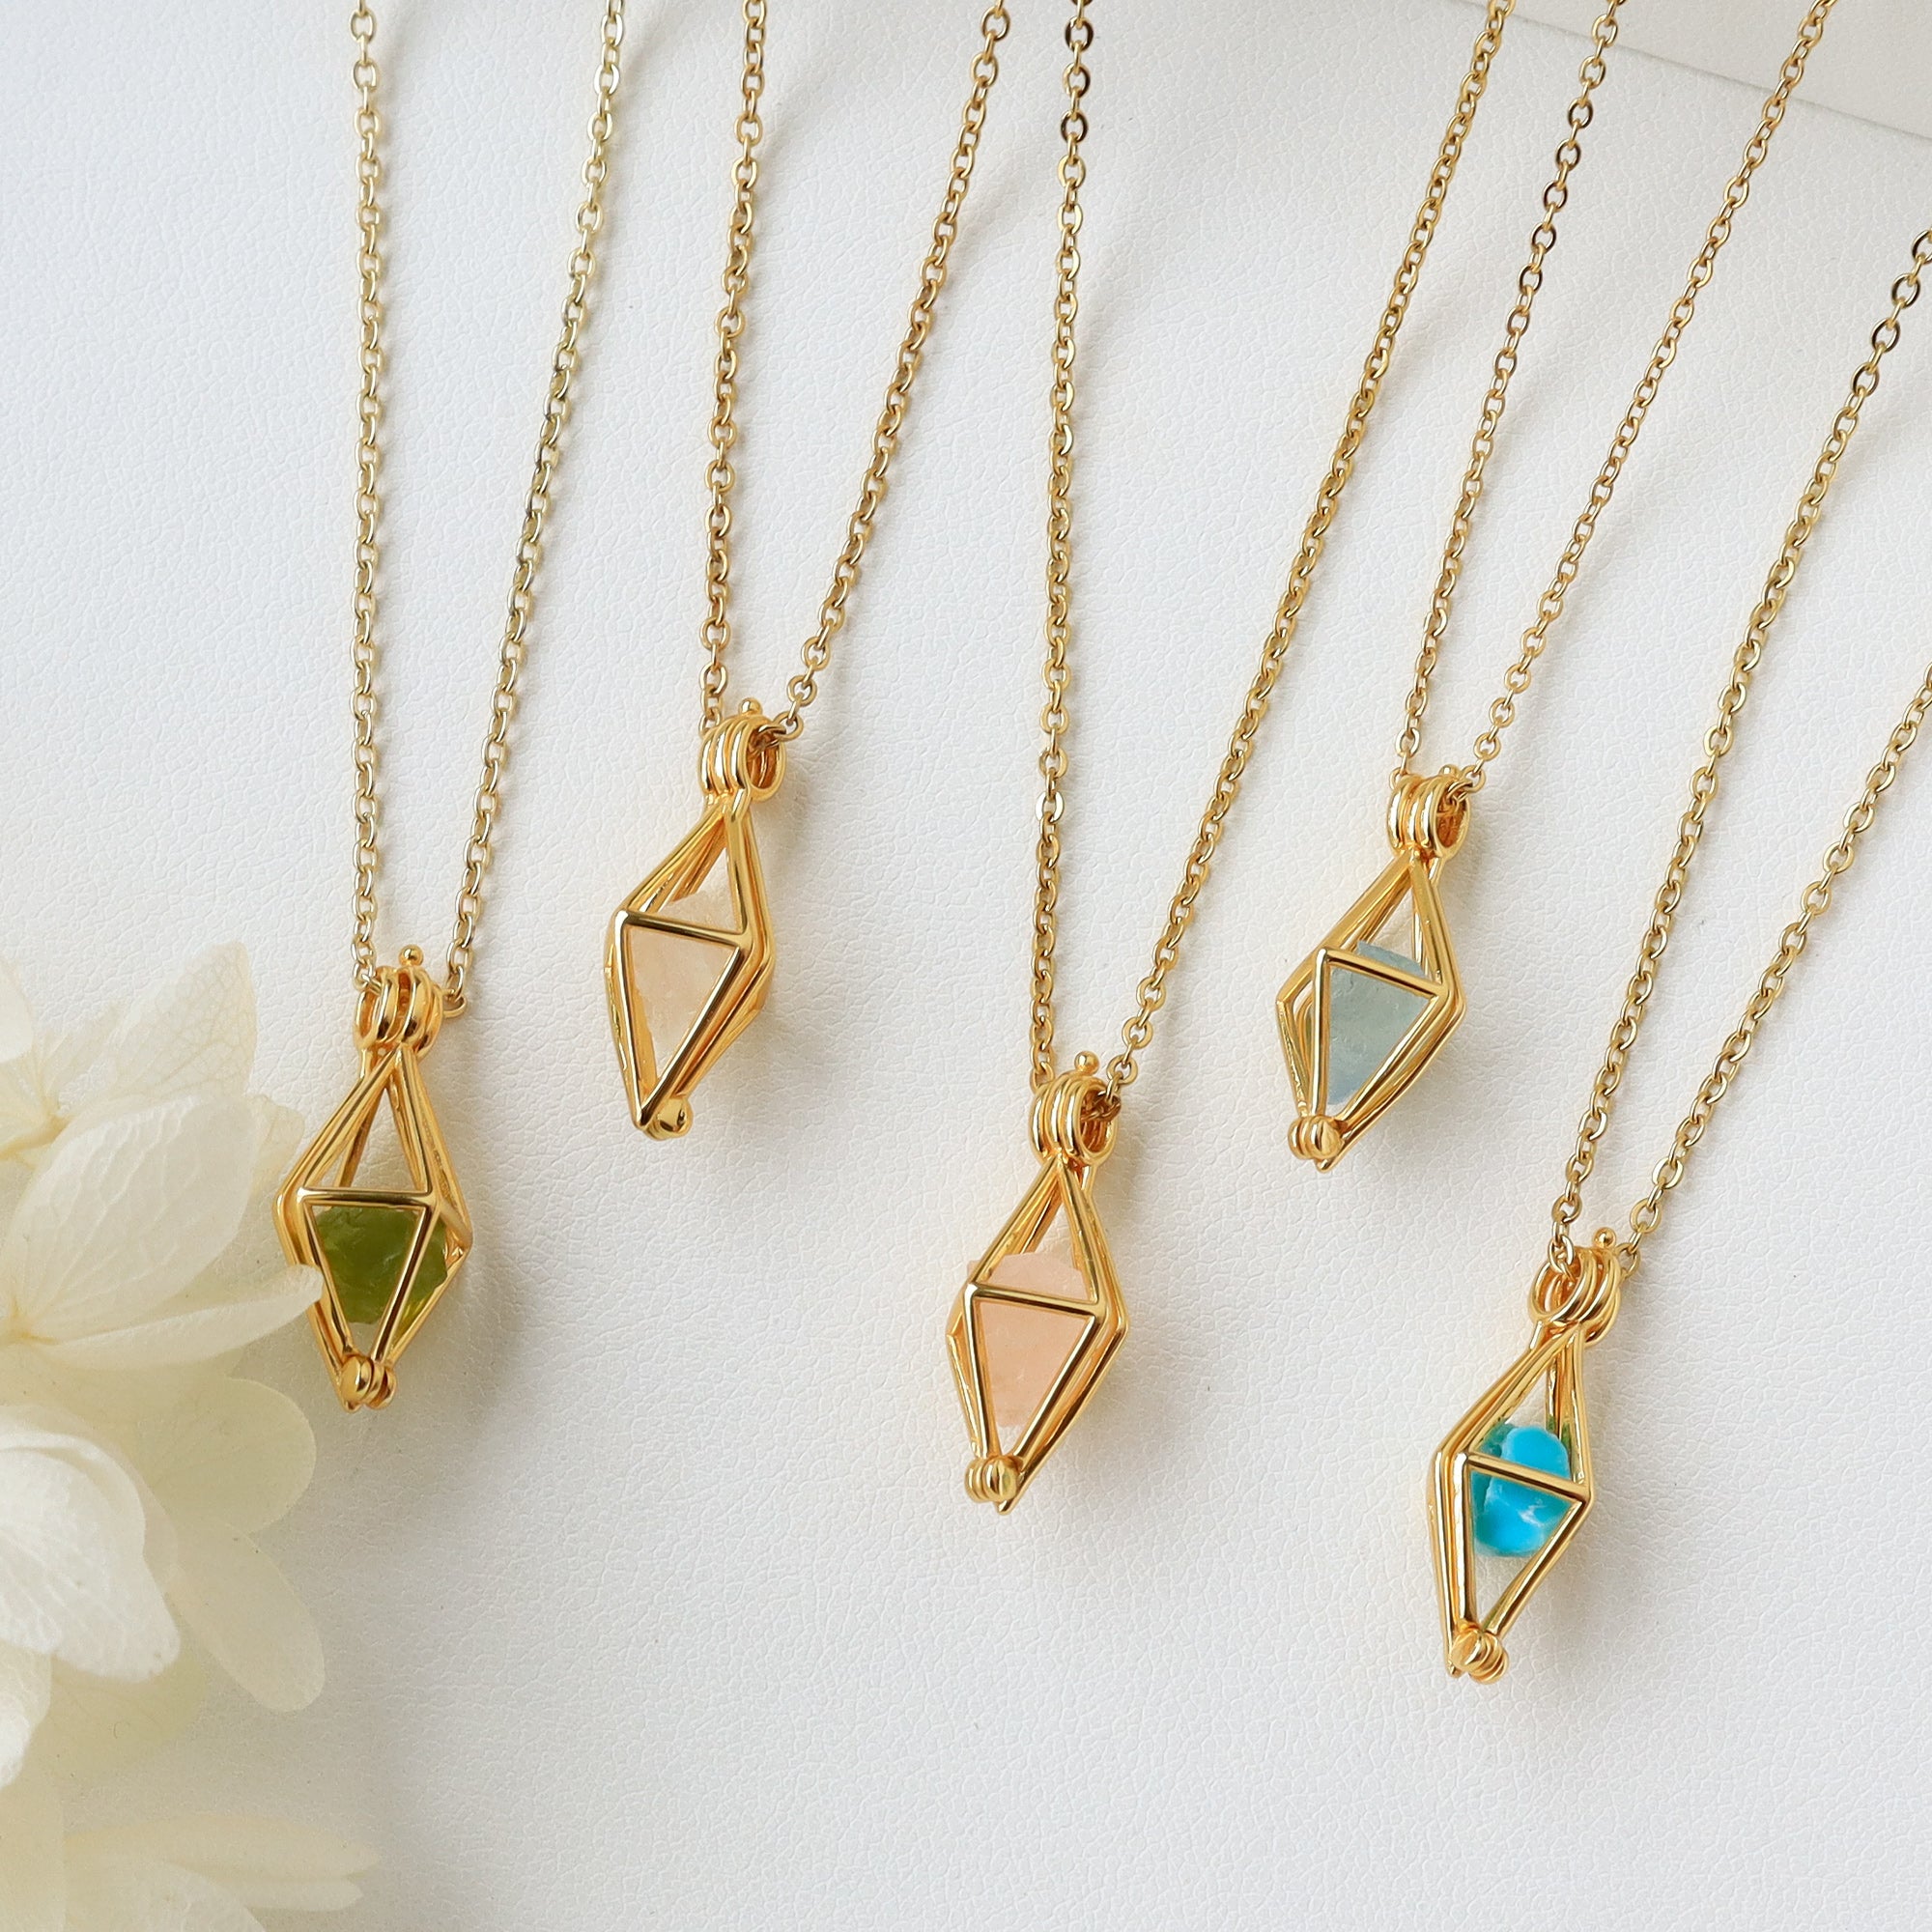 16" Gold Plated Hollow Diamond Raw Gemstone Pendant Necklace, Healing Crystal Stone Necklace, Birthstone Necklace, Fashion Jewelry Gift For Women BT006